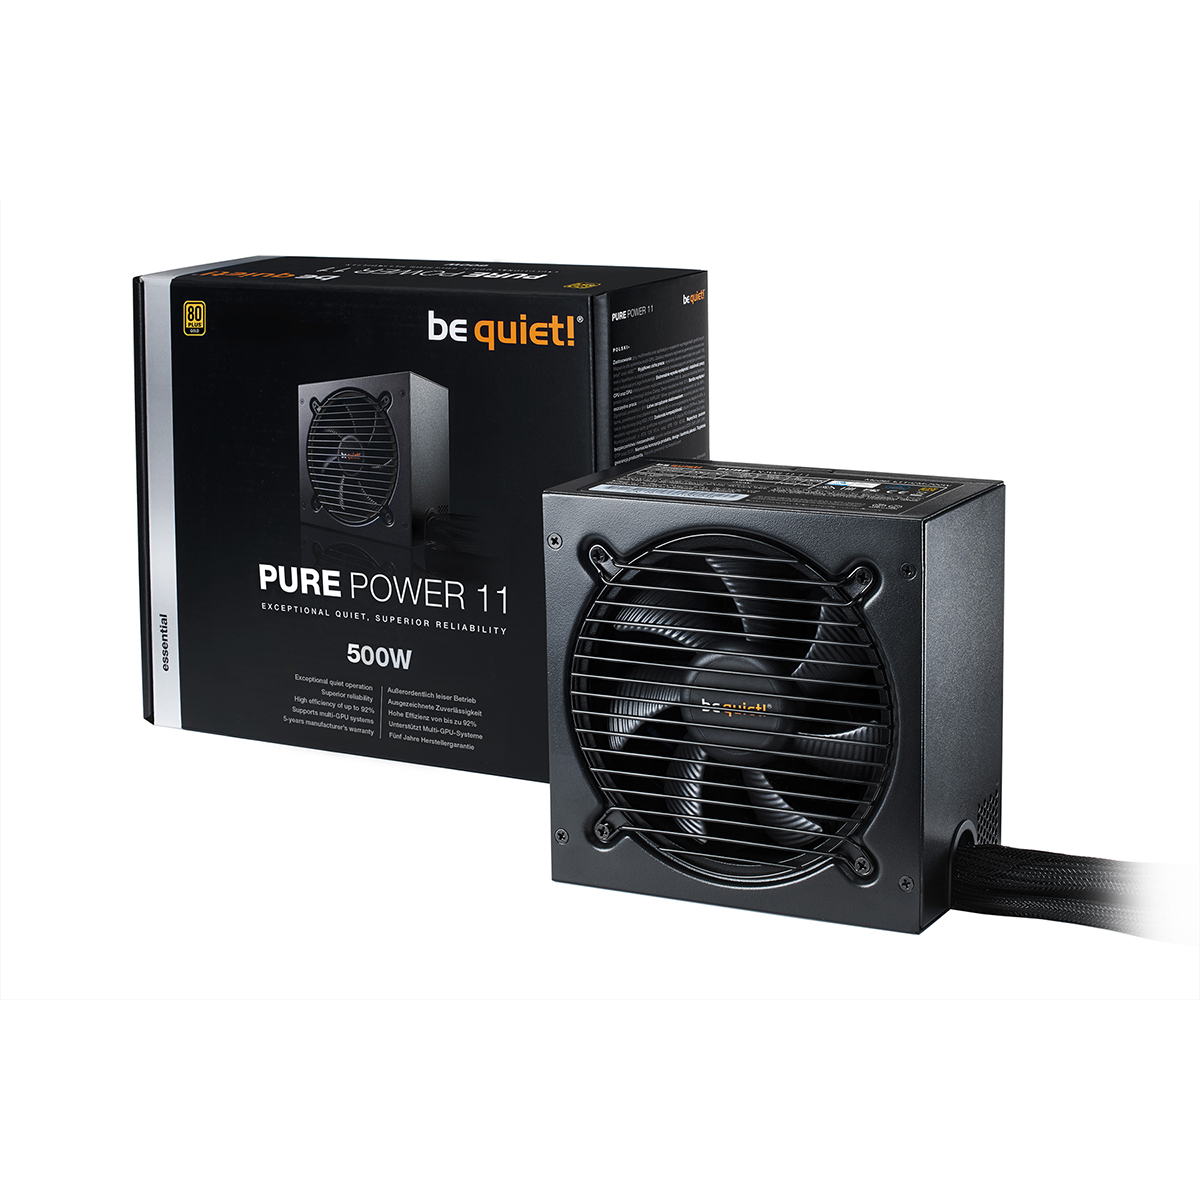 be quiet! - be quiet Pure Power 11 500W 80 Plus Gold Power Supply